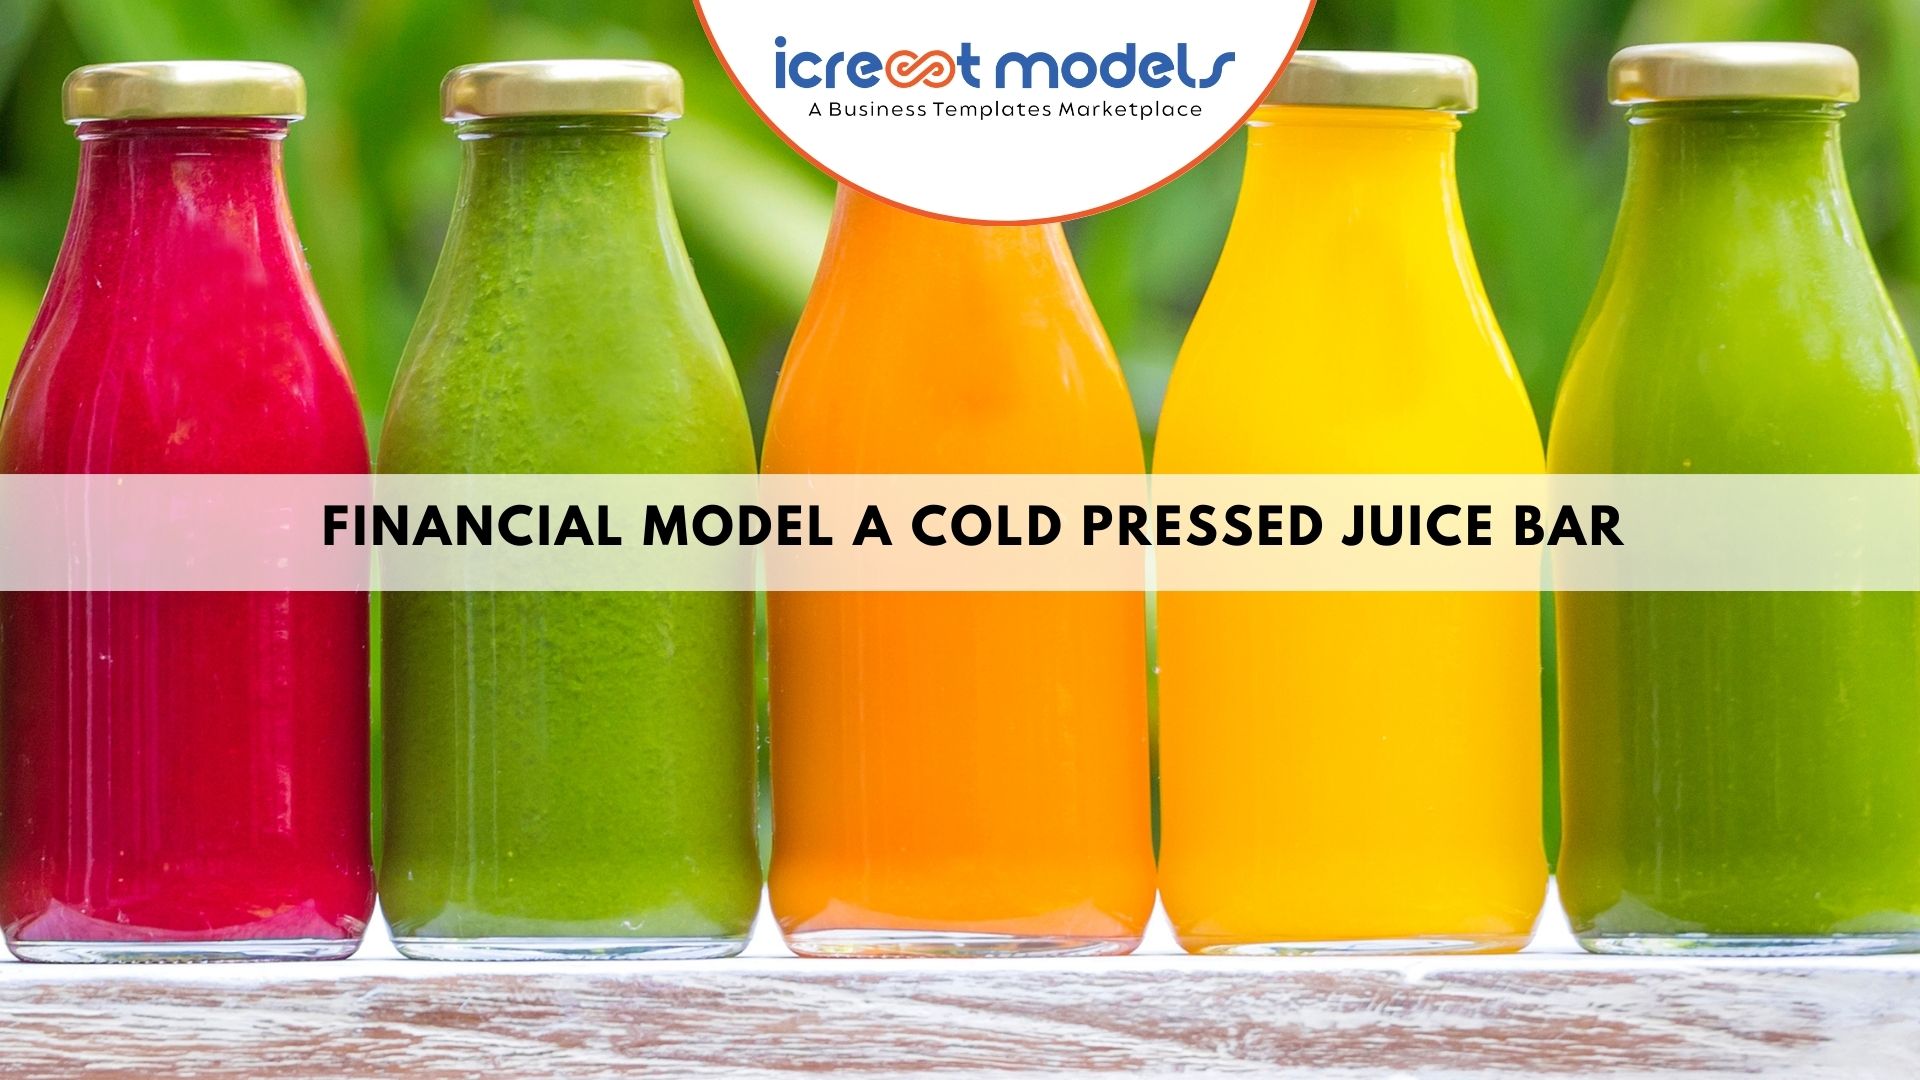 Financial Model a Cold Pressed Juice Bar